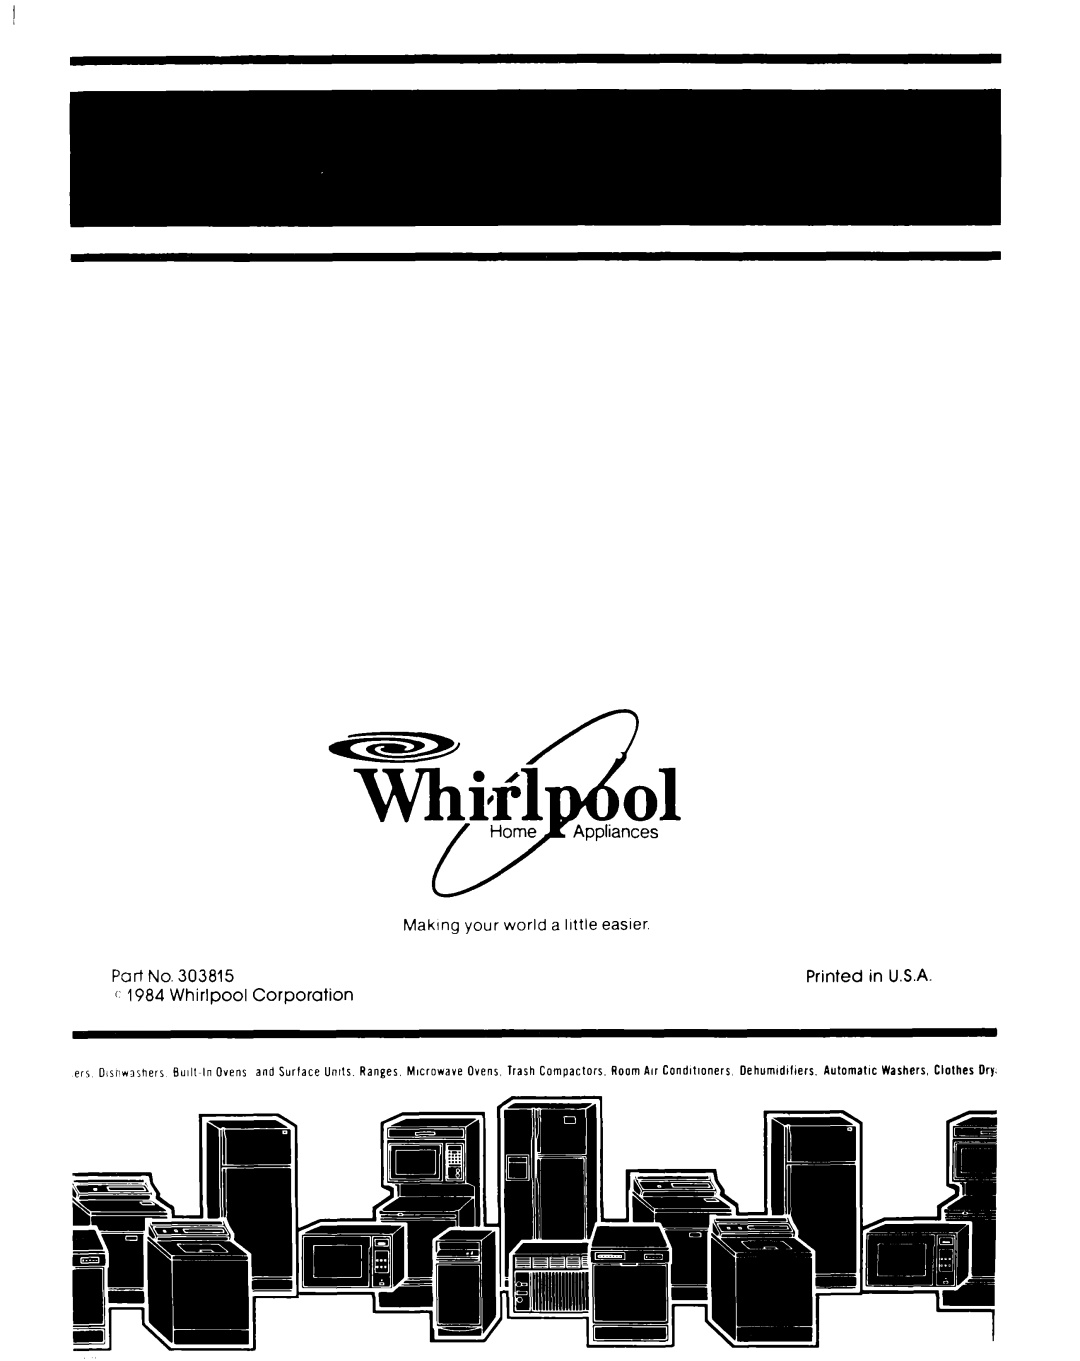 Whirlpool DU7903XL manual ‘ 1984 Whirlpool, Corporation, Making your world a little easier 